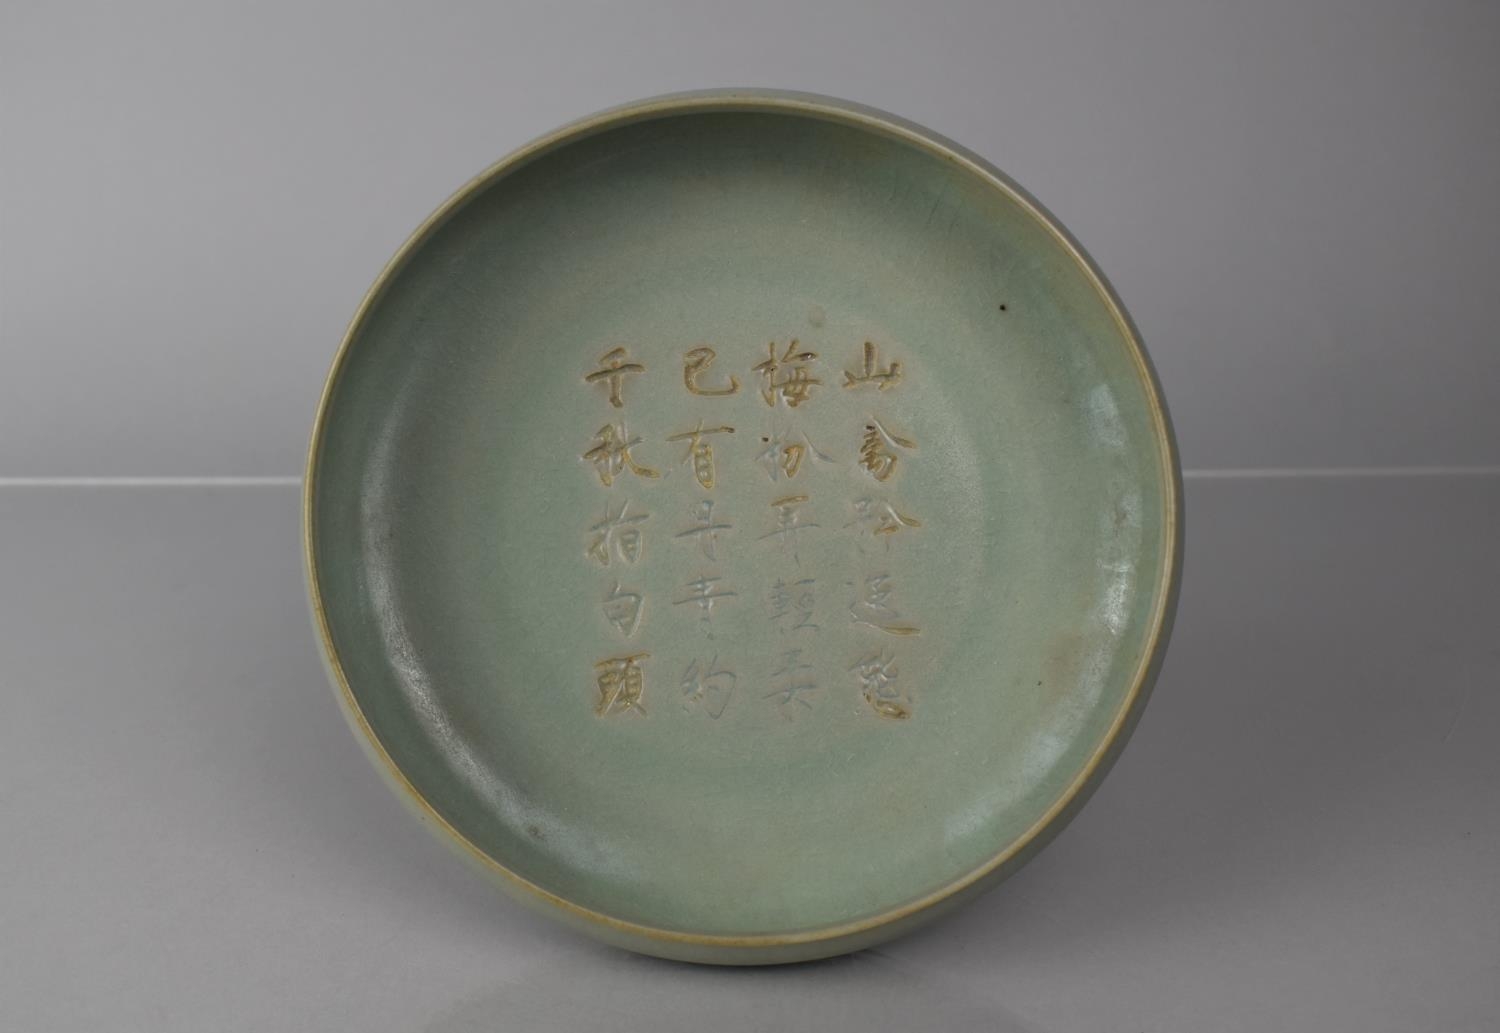 A Chinese Celadon Brush Washer/Bowl, Blue-Green and Ice Crackle Ru Type Glaze with Incised 20 - Image 2 of 8